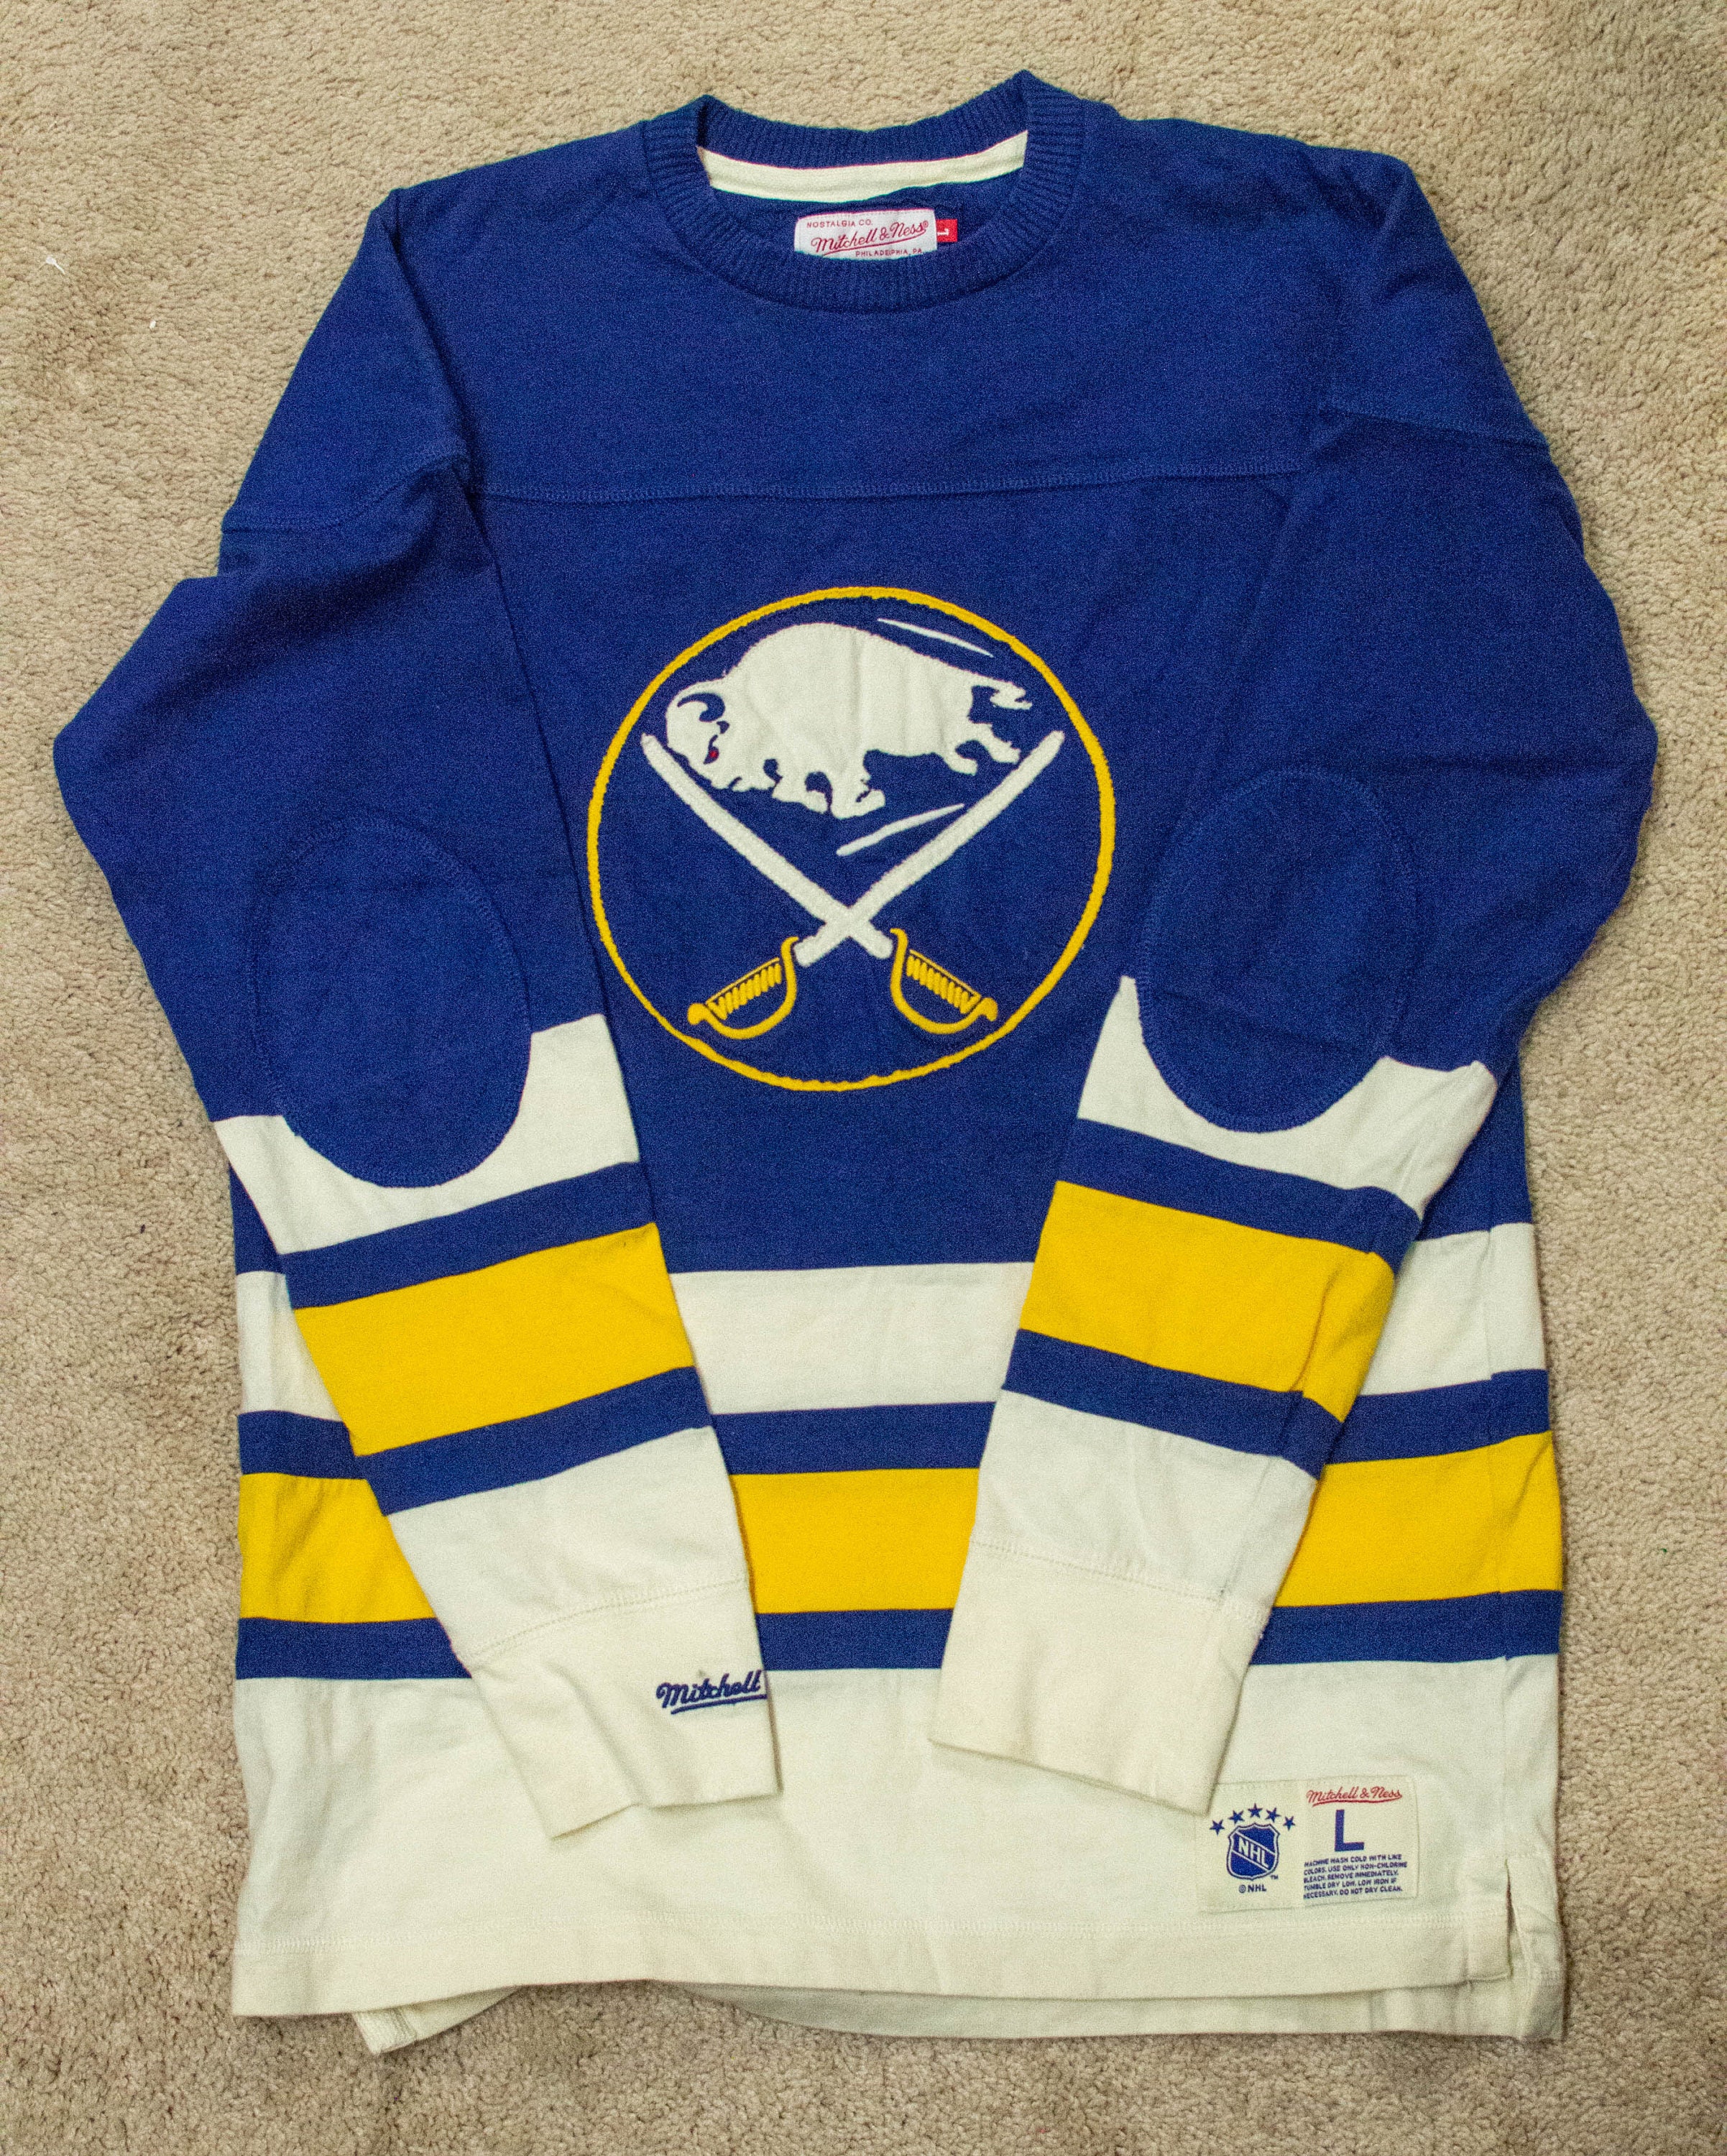 Mitchell & Ness, Tops, Mitchell Ness Buffalo Sabres Long Sleeved Shirt